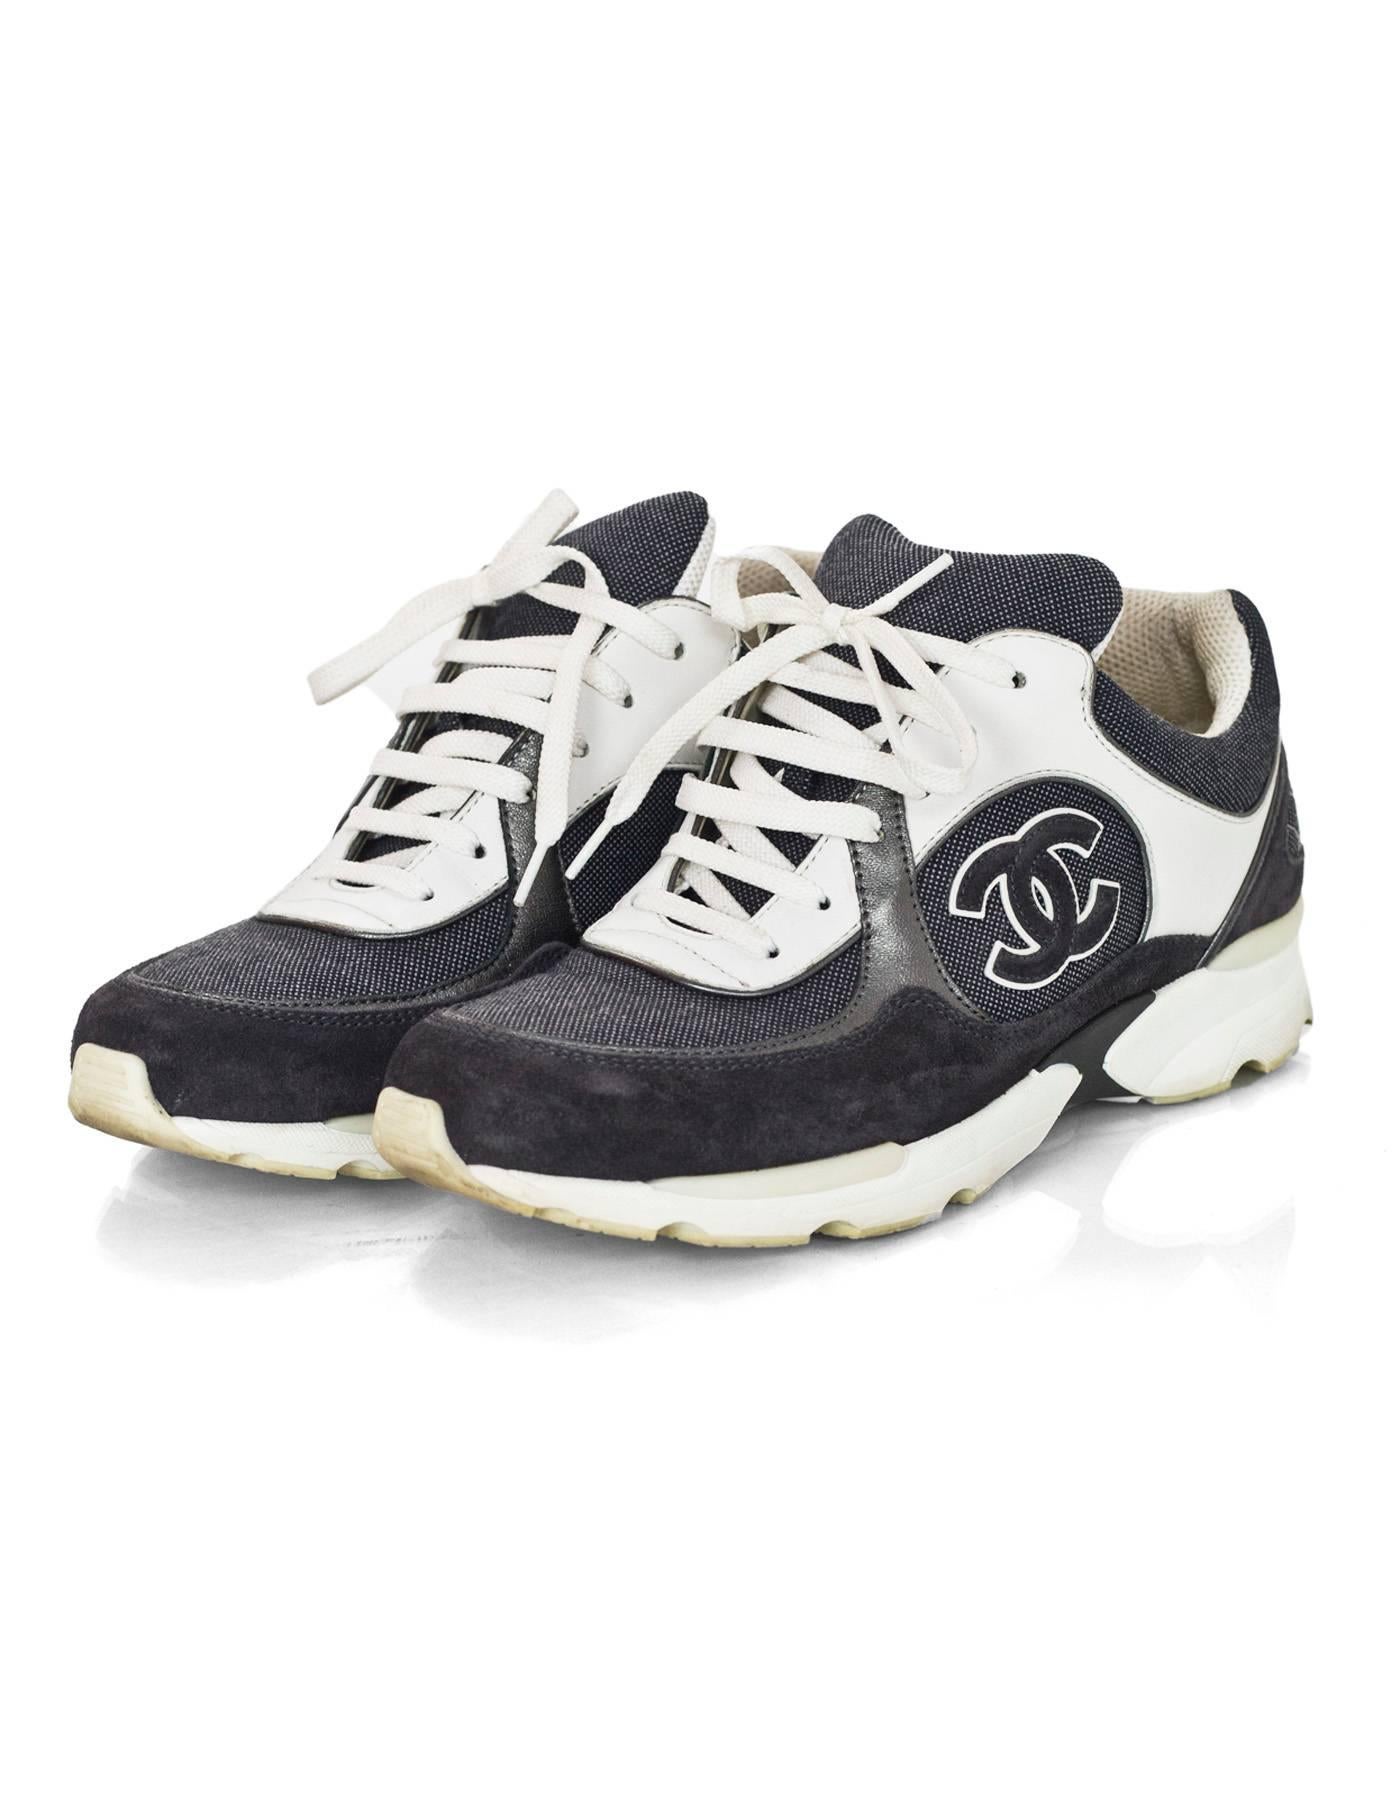 Chanel White and Grey CC Sneakers Sz 38.5 with Box

Made In: Italy
Color: White, grey
Materials: Leather, suede
Closure: Lace tie
Overall Condition: Light wear at insoles and outsoles, light surface marks and discoloration
Includes: Chanel box